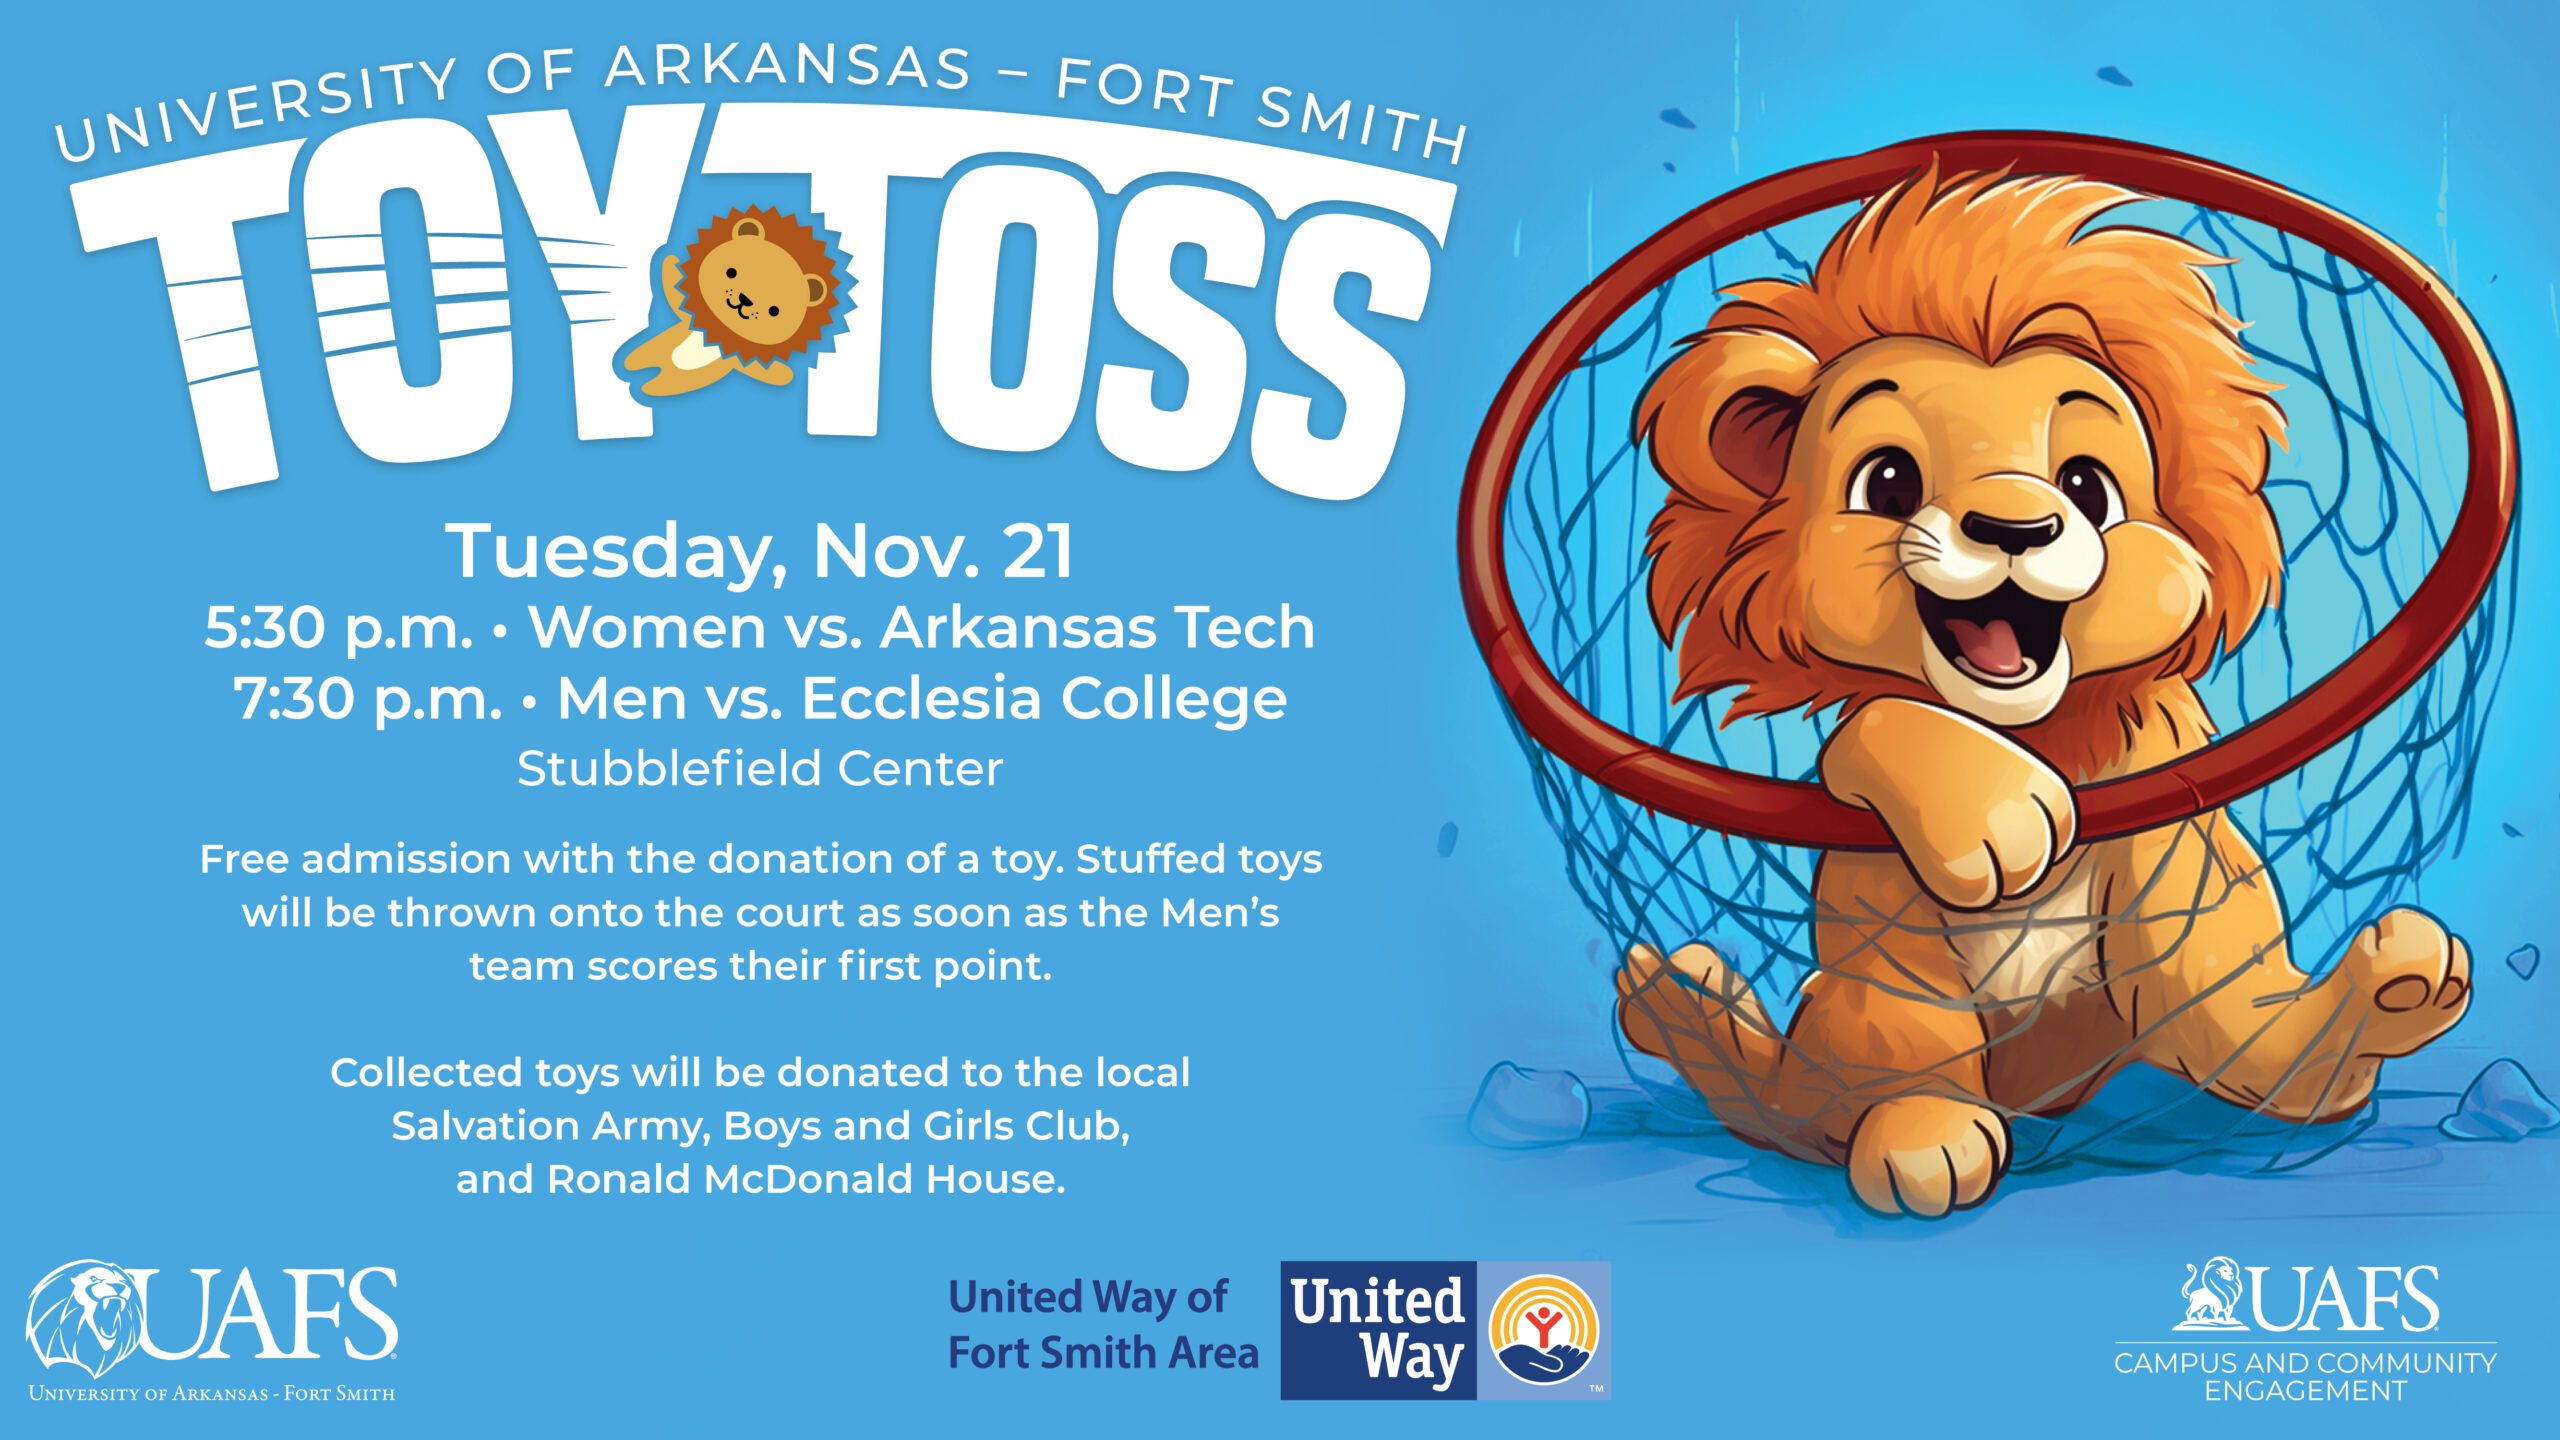 UAFS Announces that the Toy Toss is BACK!